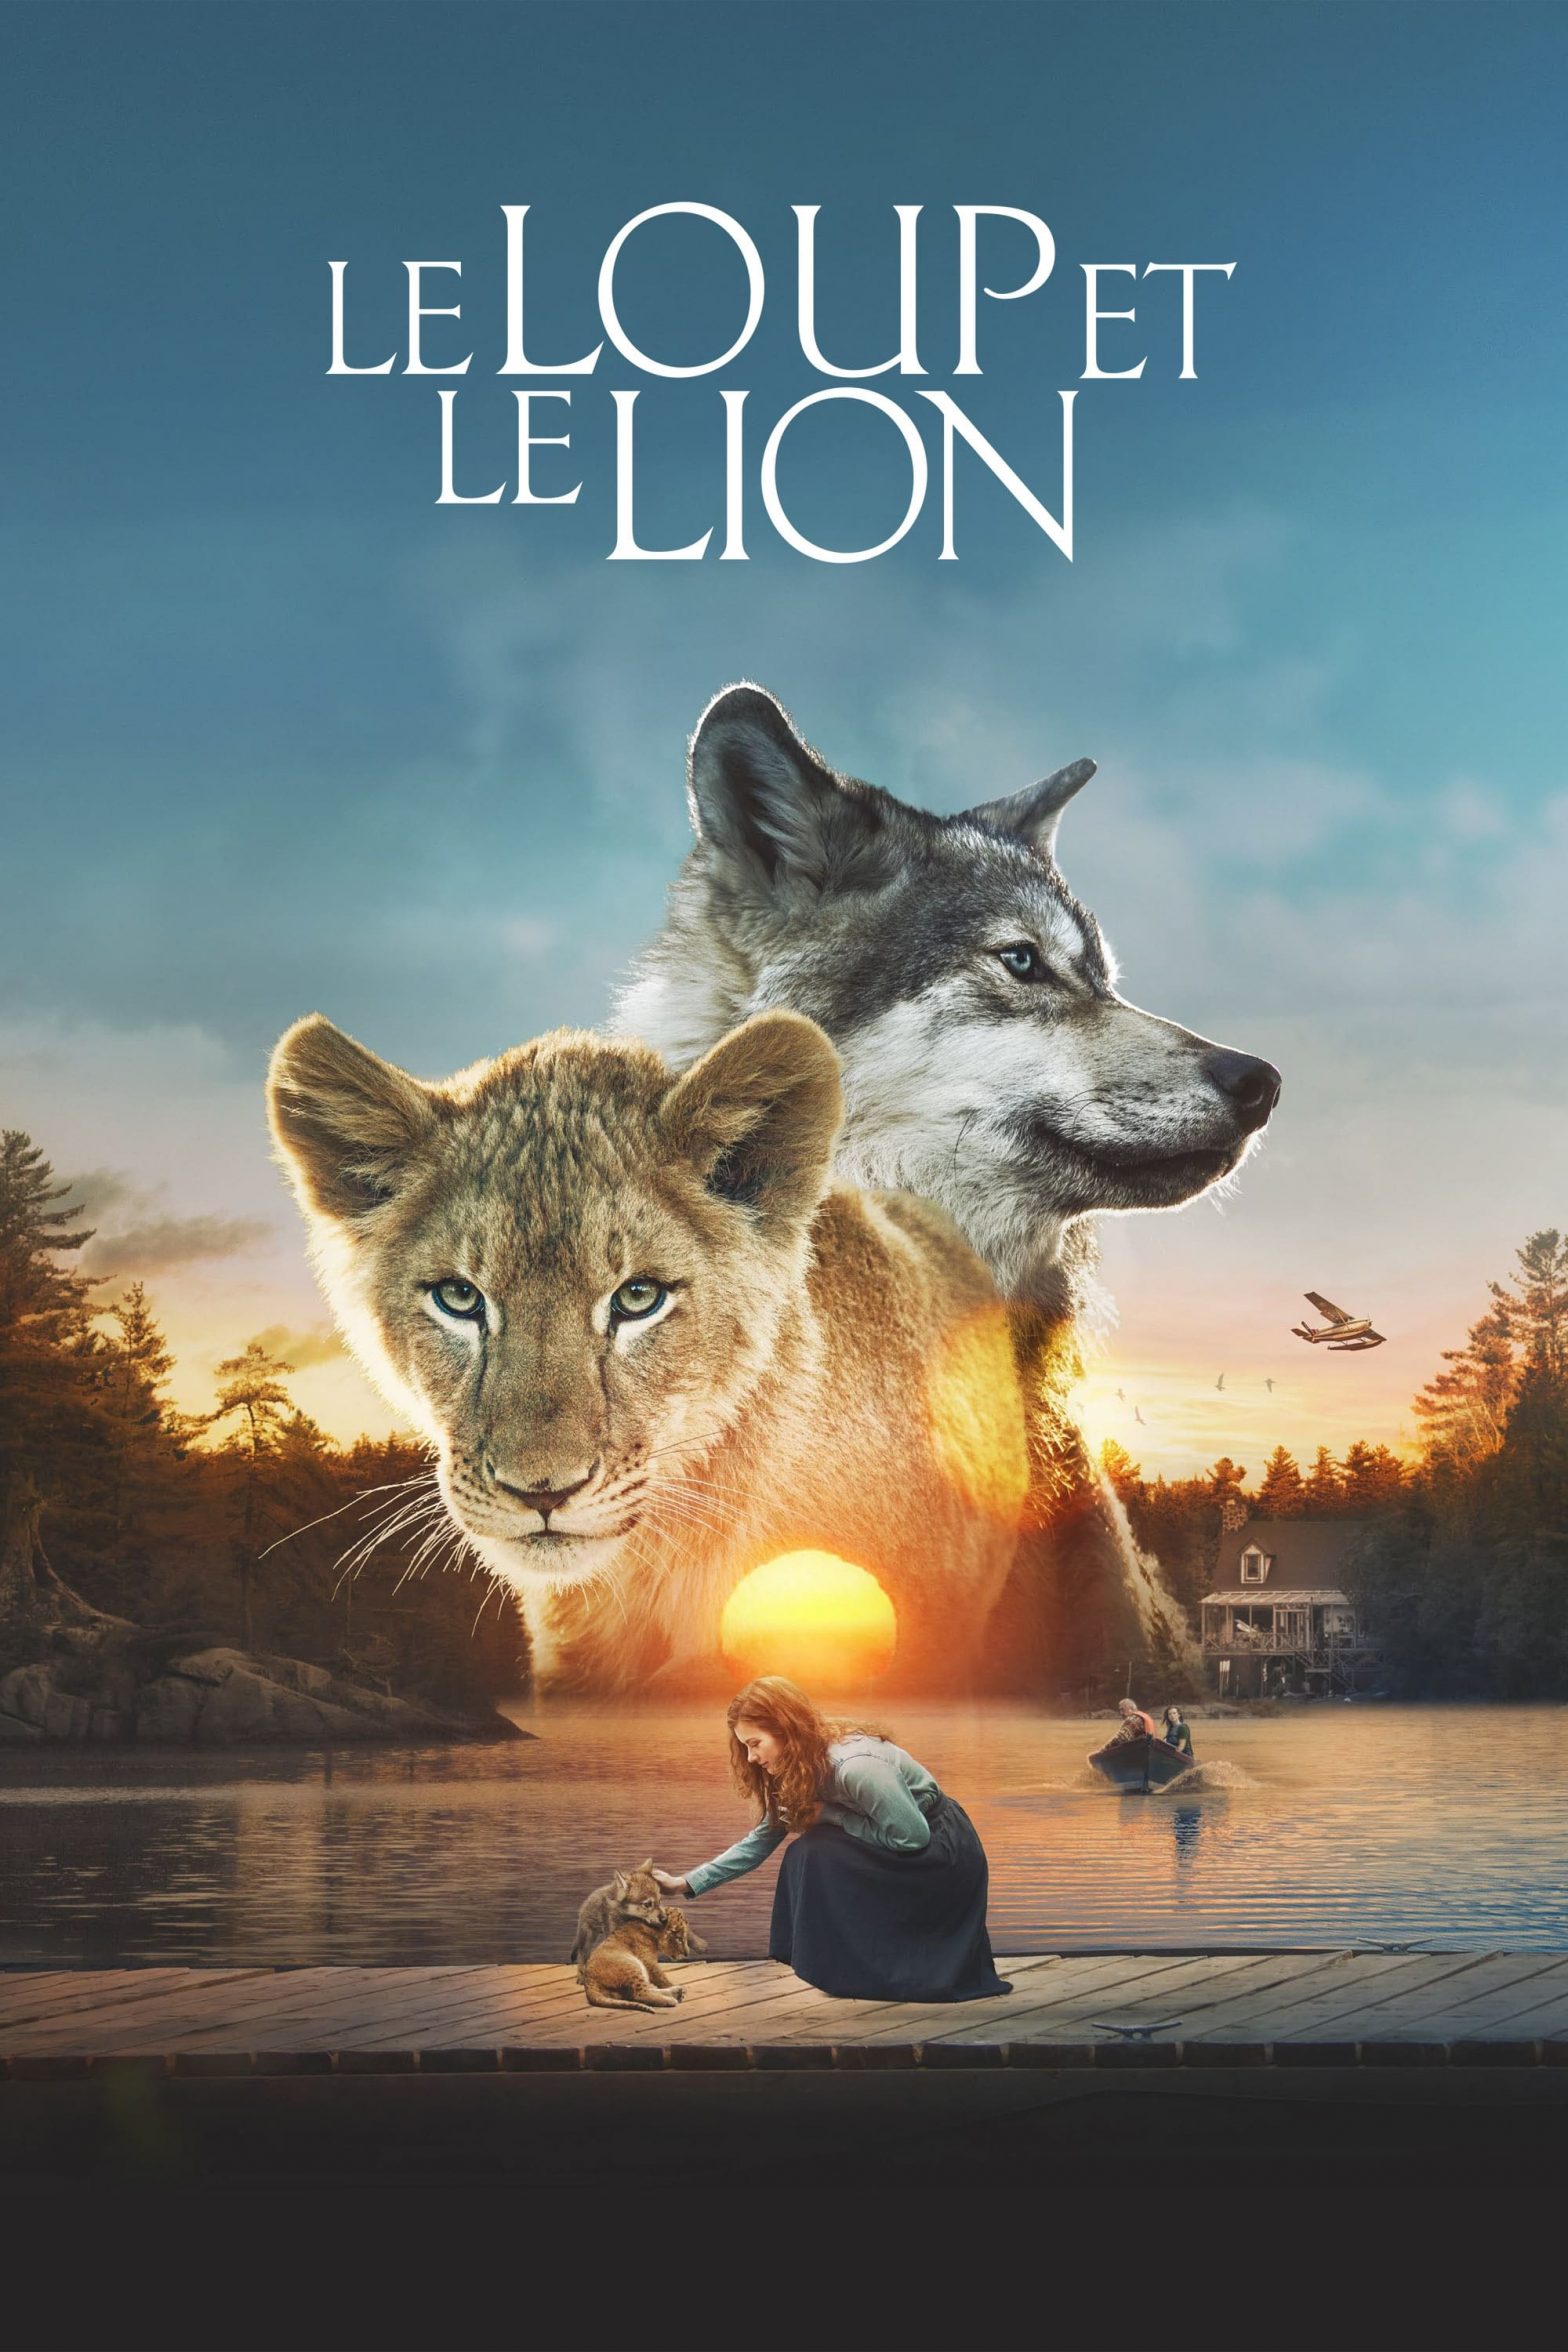 Watch The Wolf and the Lion Full Movie Online For Free In HD Quality